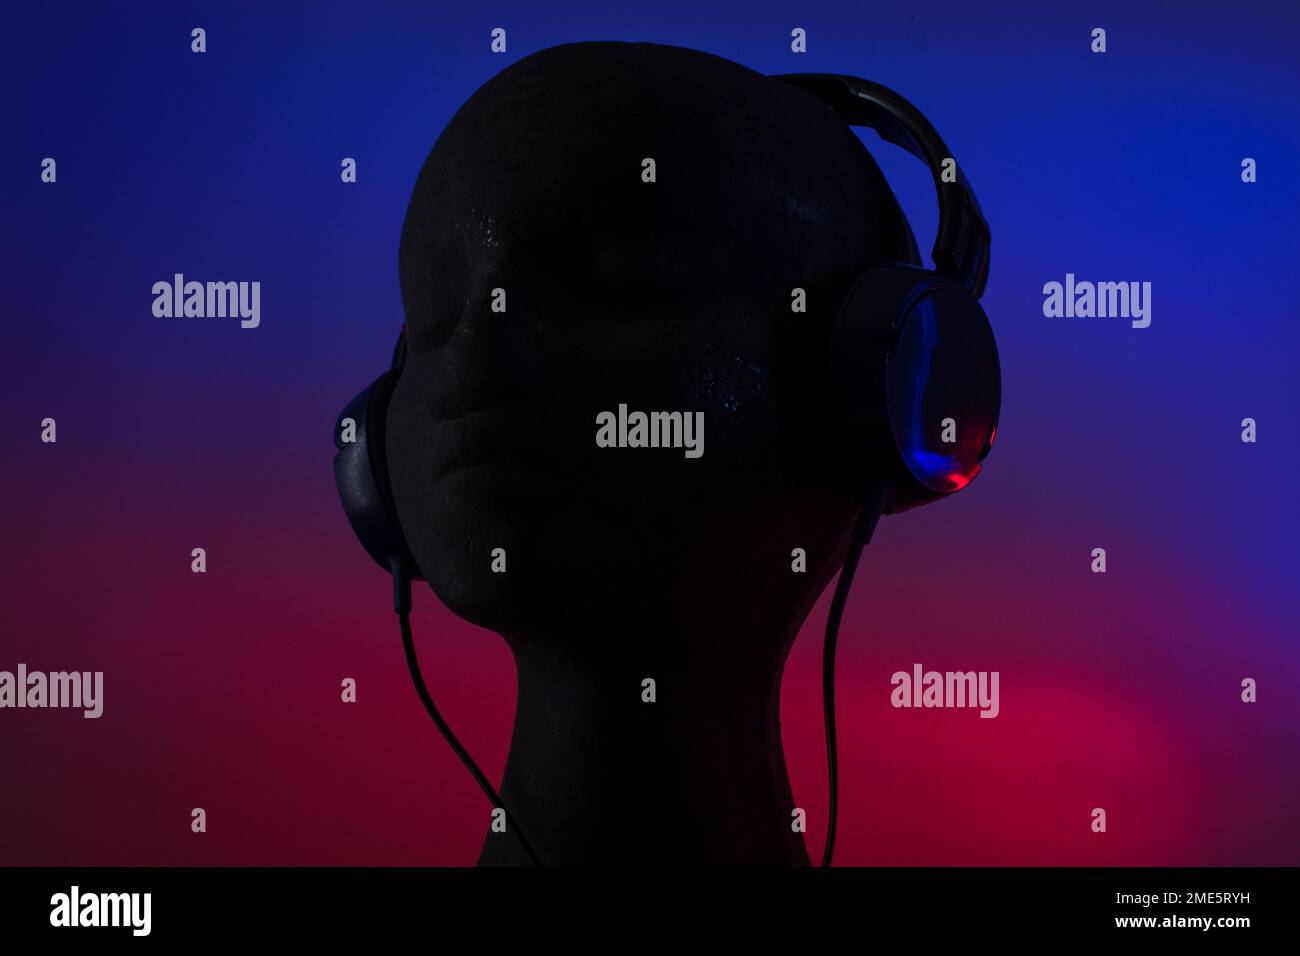 Over-ear headphones on black head on blue and red background Stock Photo